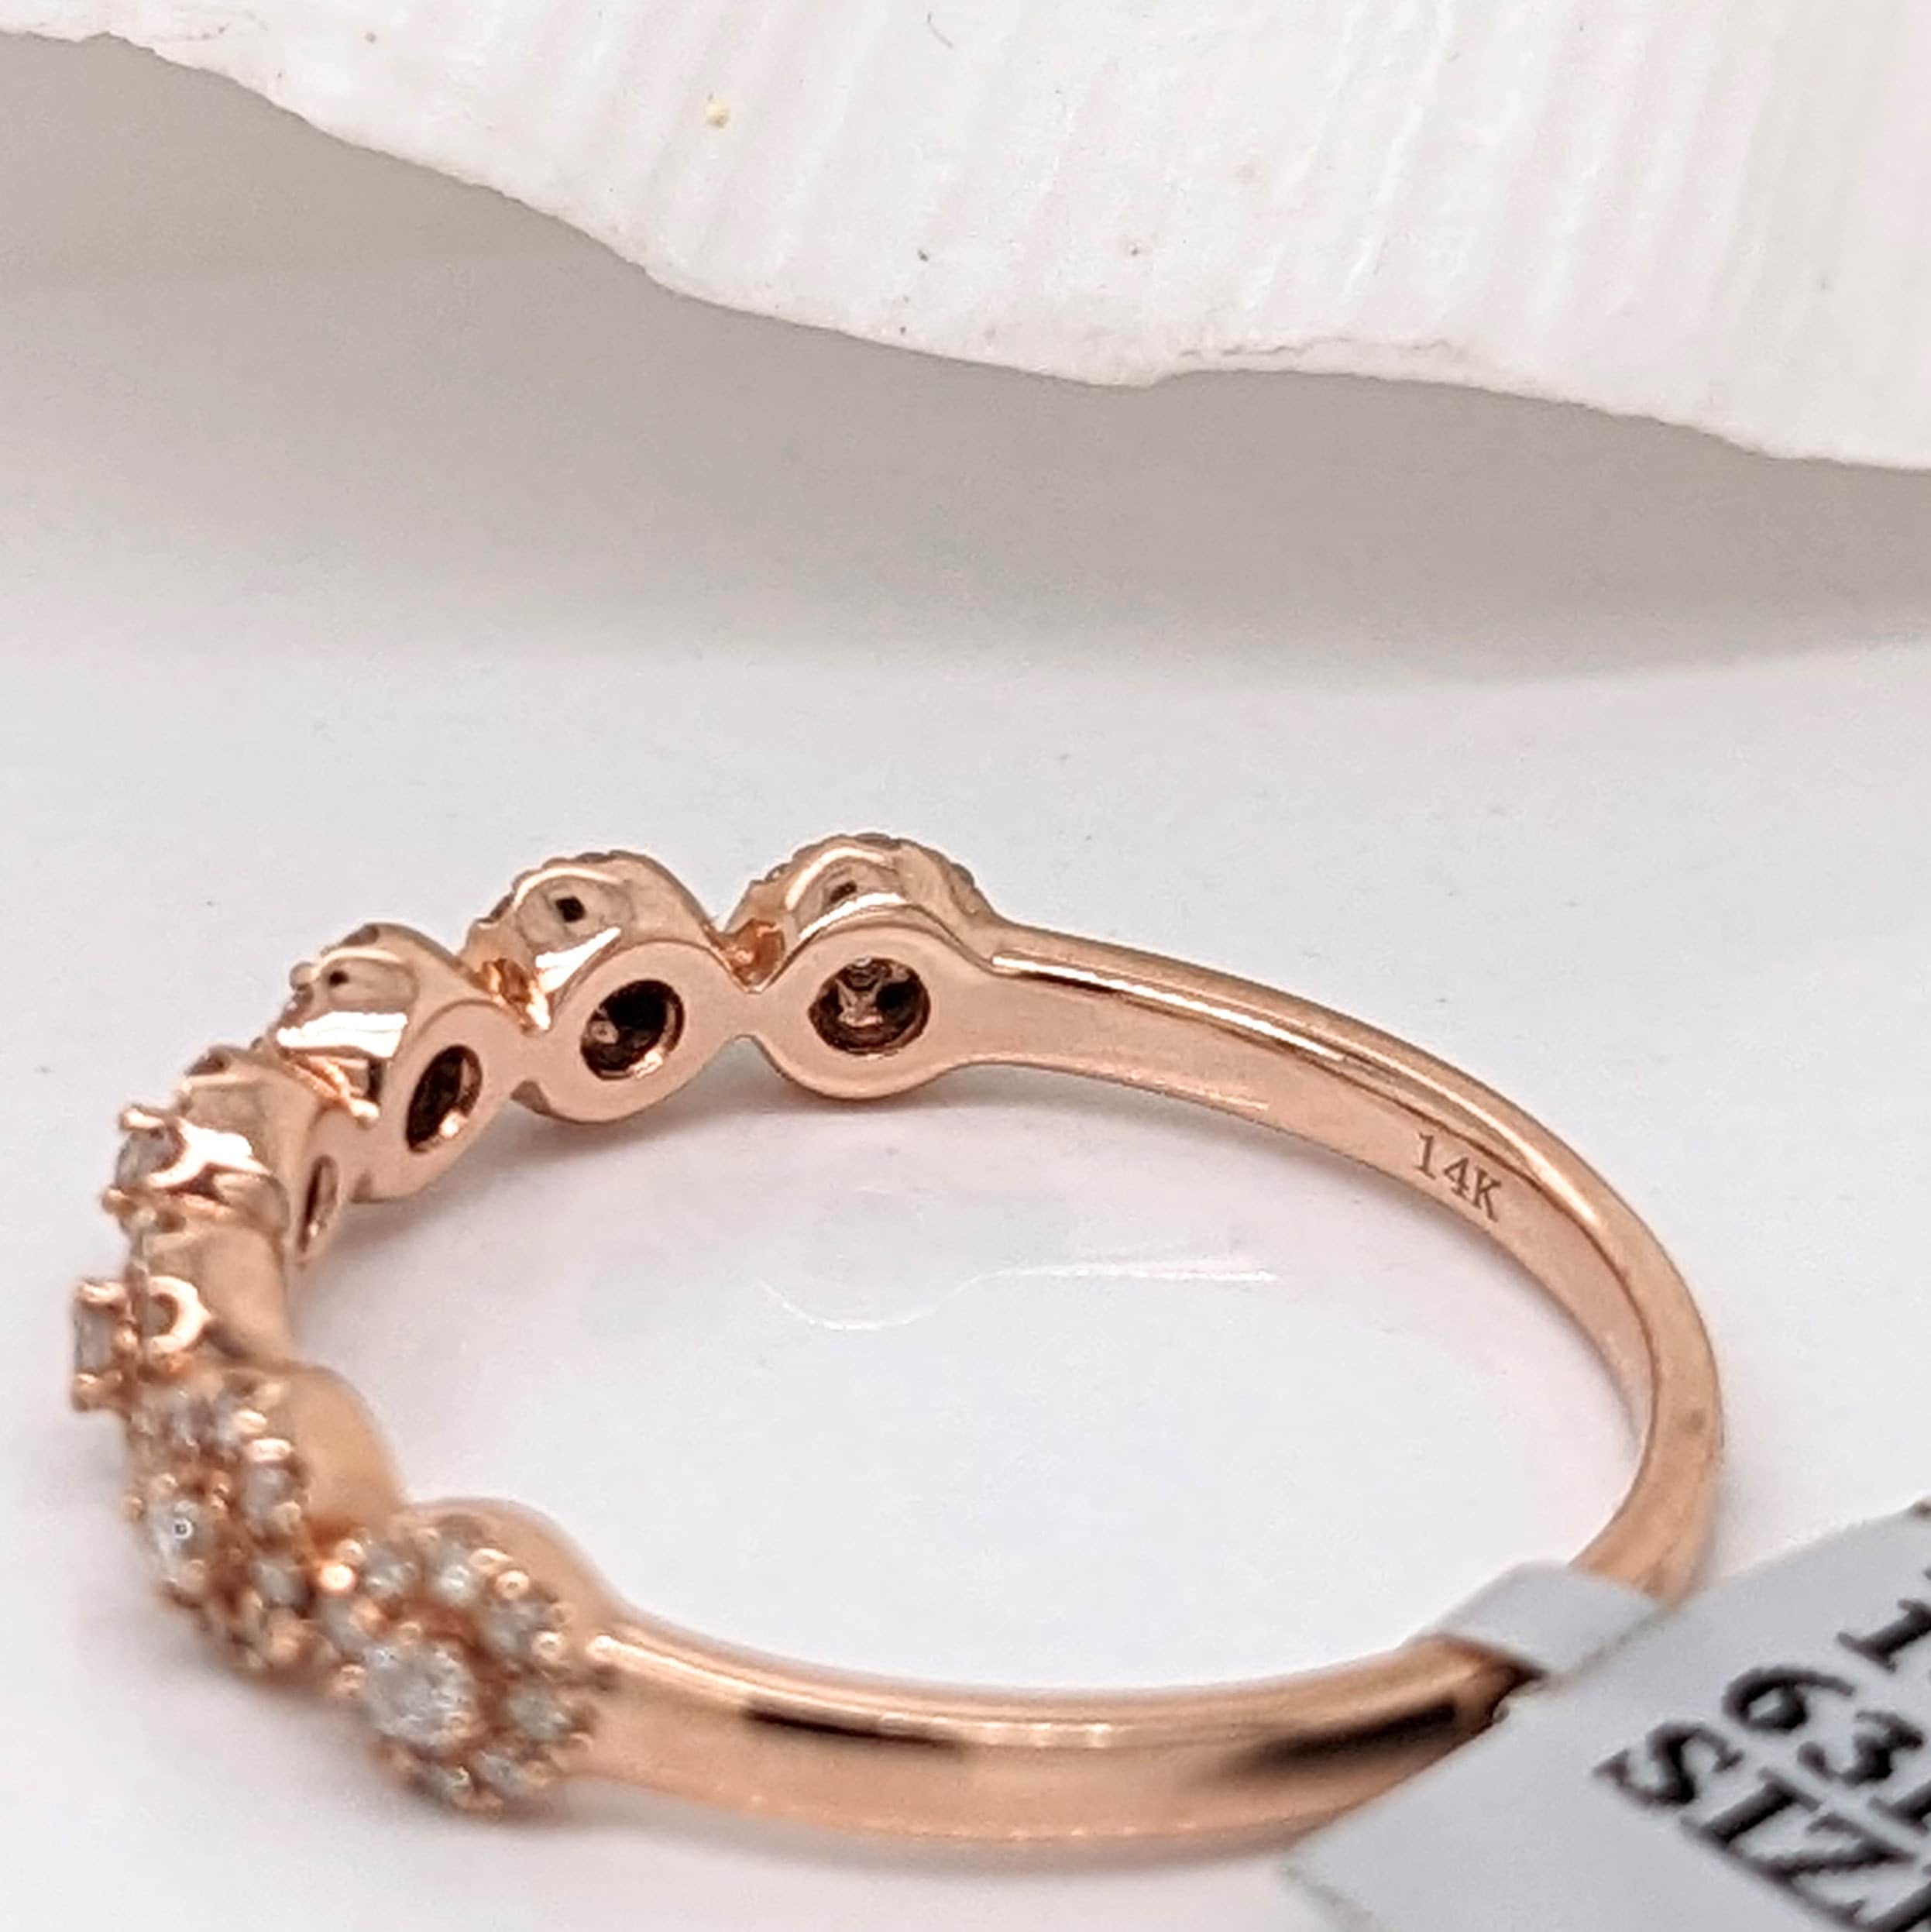 Stackable Rings-Beautiful Natural Diamond Ring in Solid 14k Rose Gold || Round Diamonds || Customizable || Natural Diamonds || Stackable || - NNJGemstones